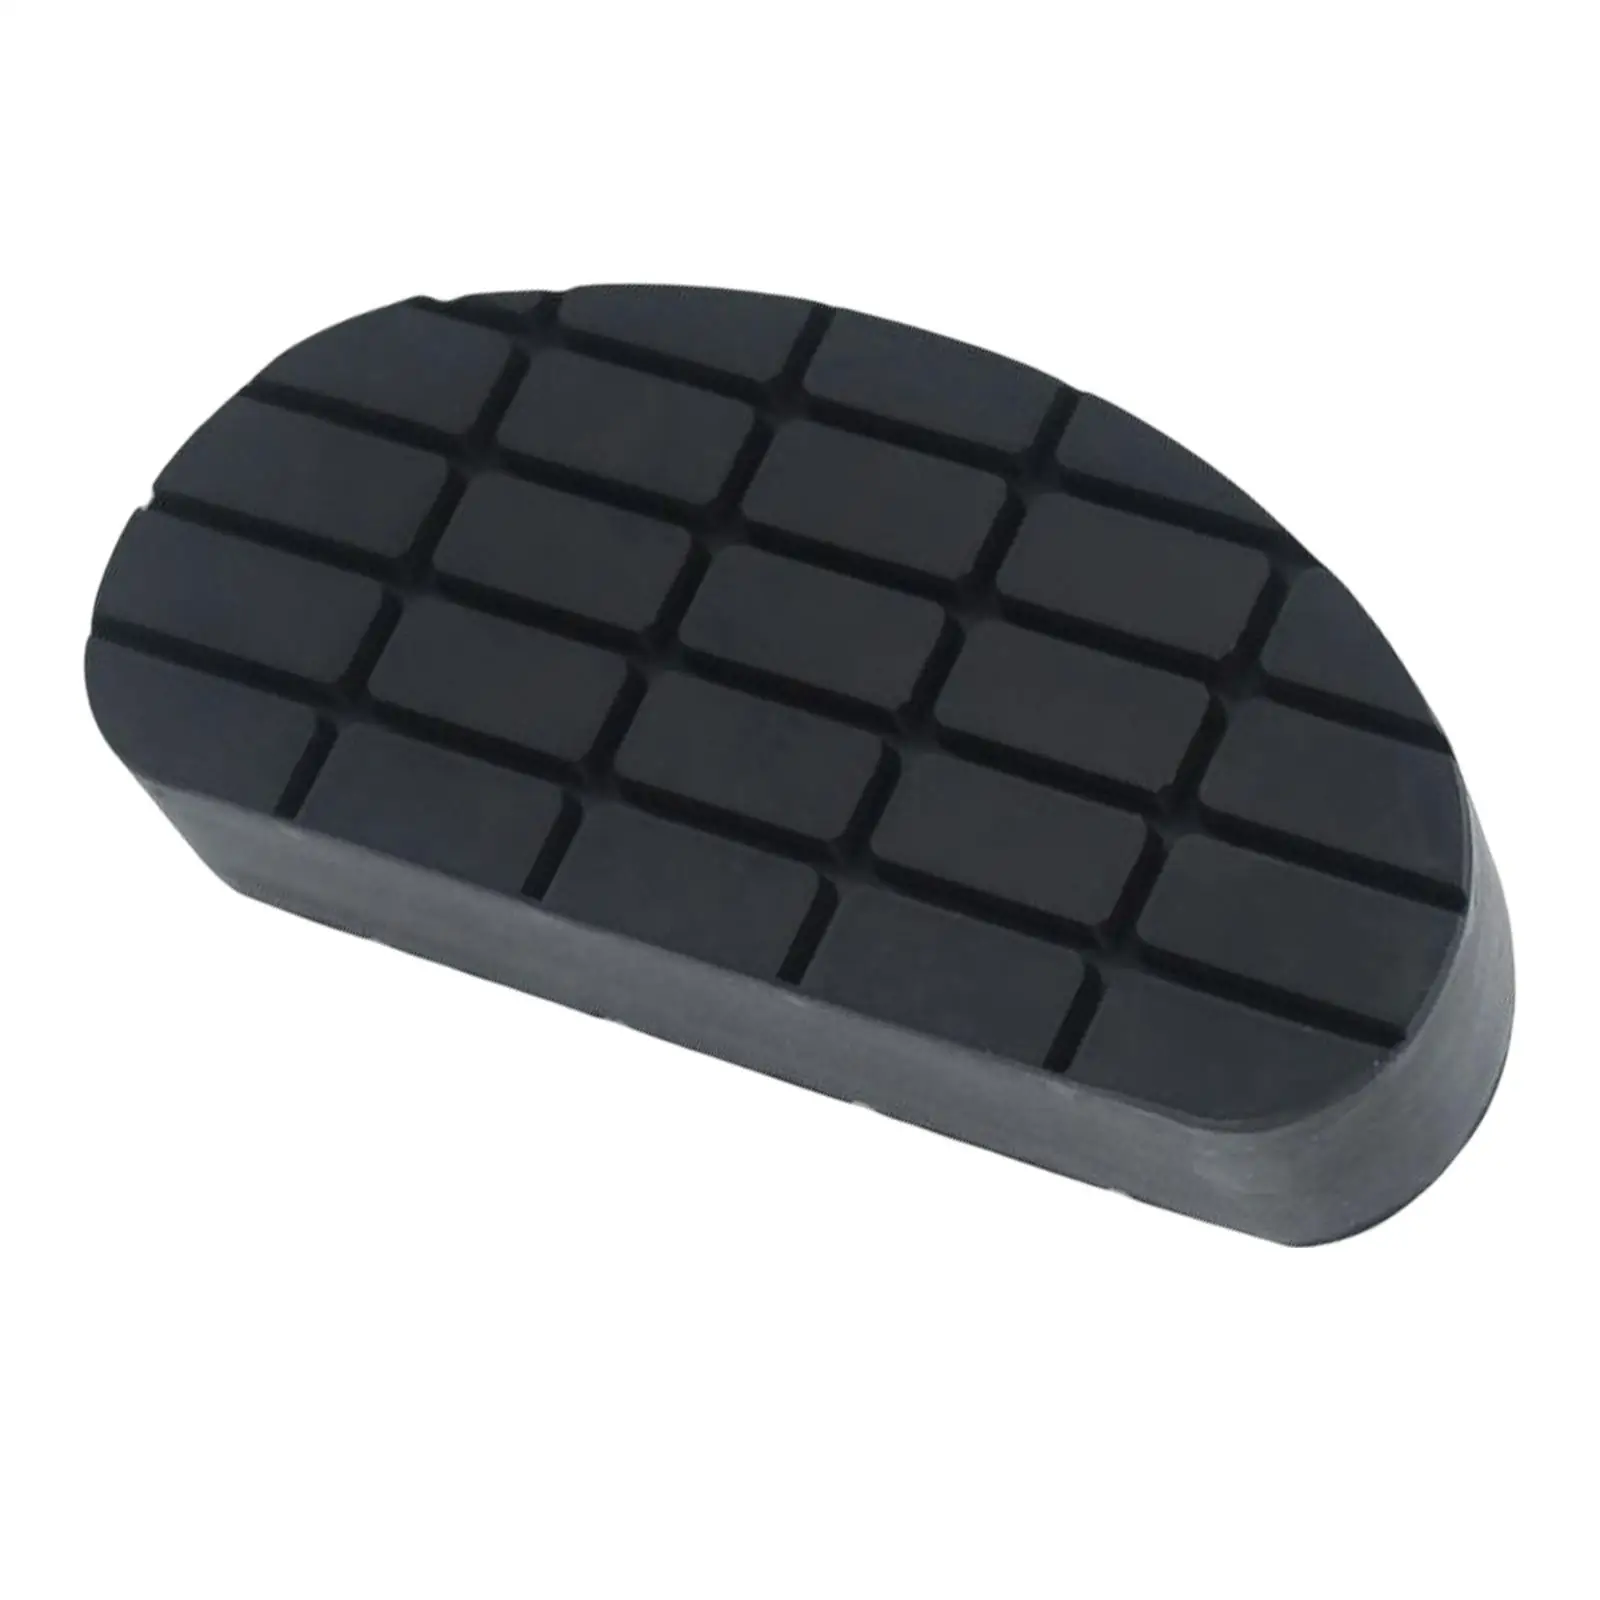 Rubber Cow Trimming Cushion Durable Competition Slabs Repair Tool Accessories